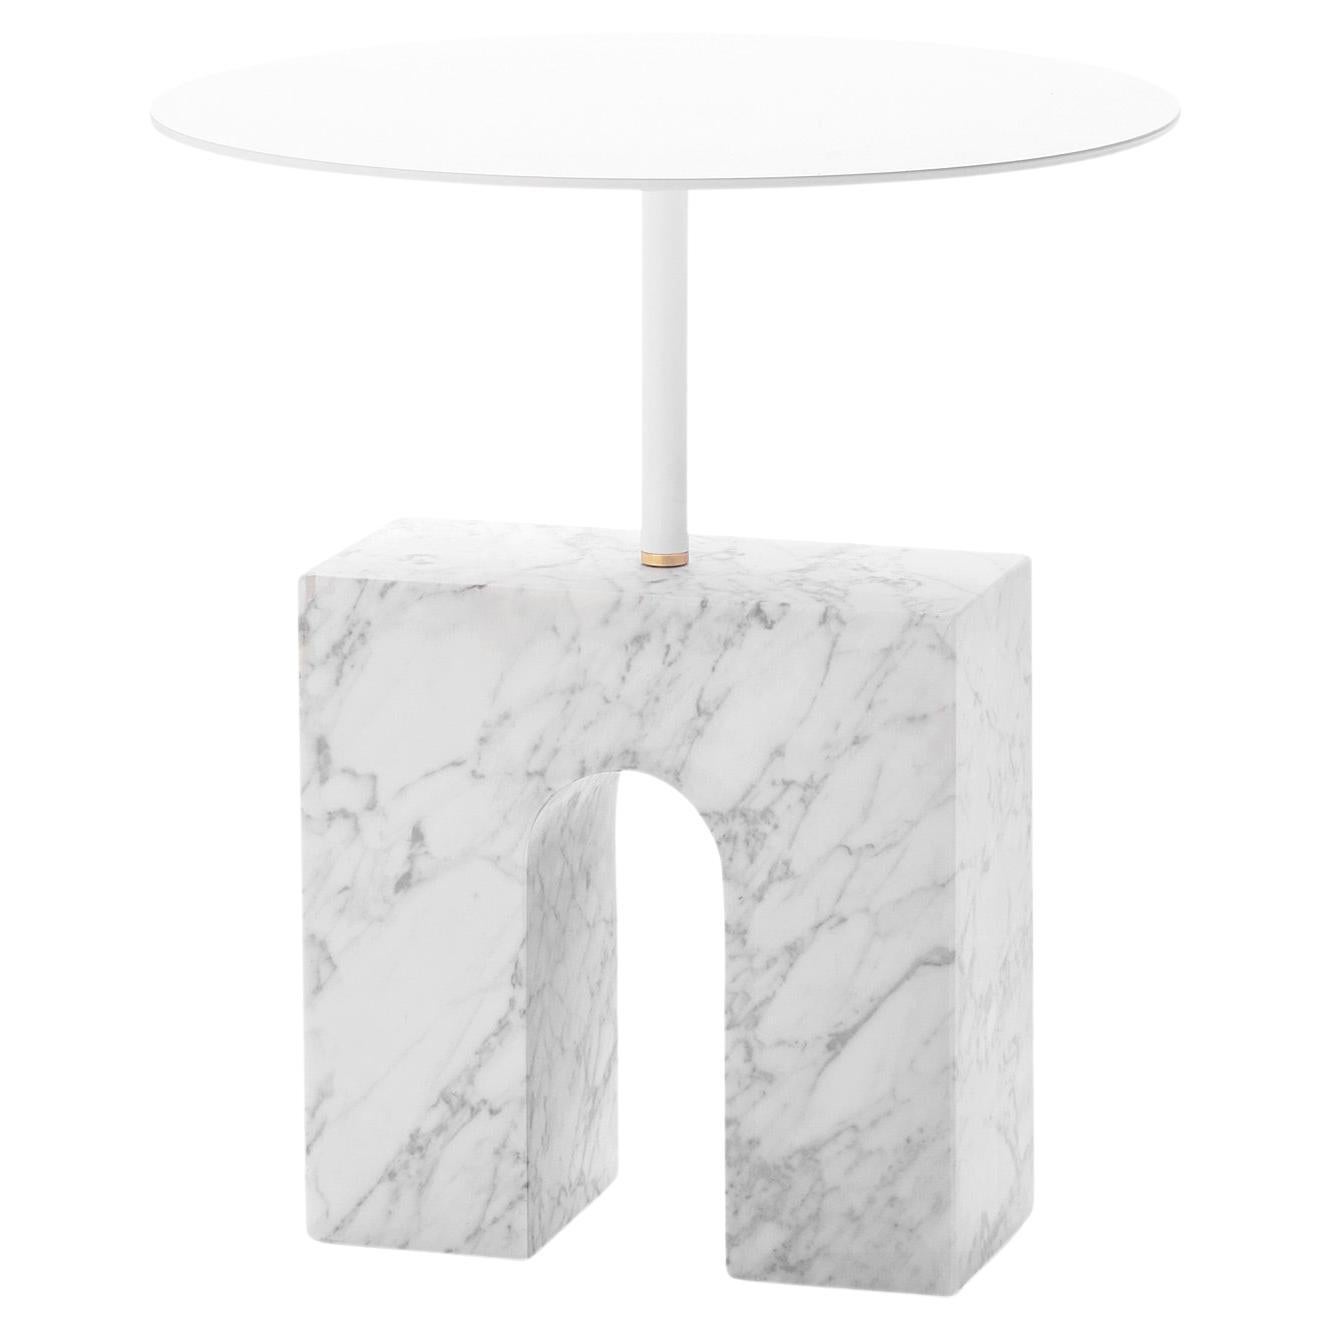 “Triumph Side Table” Minimalist Carrara Marble Side Table by Aparentment